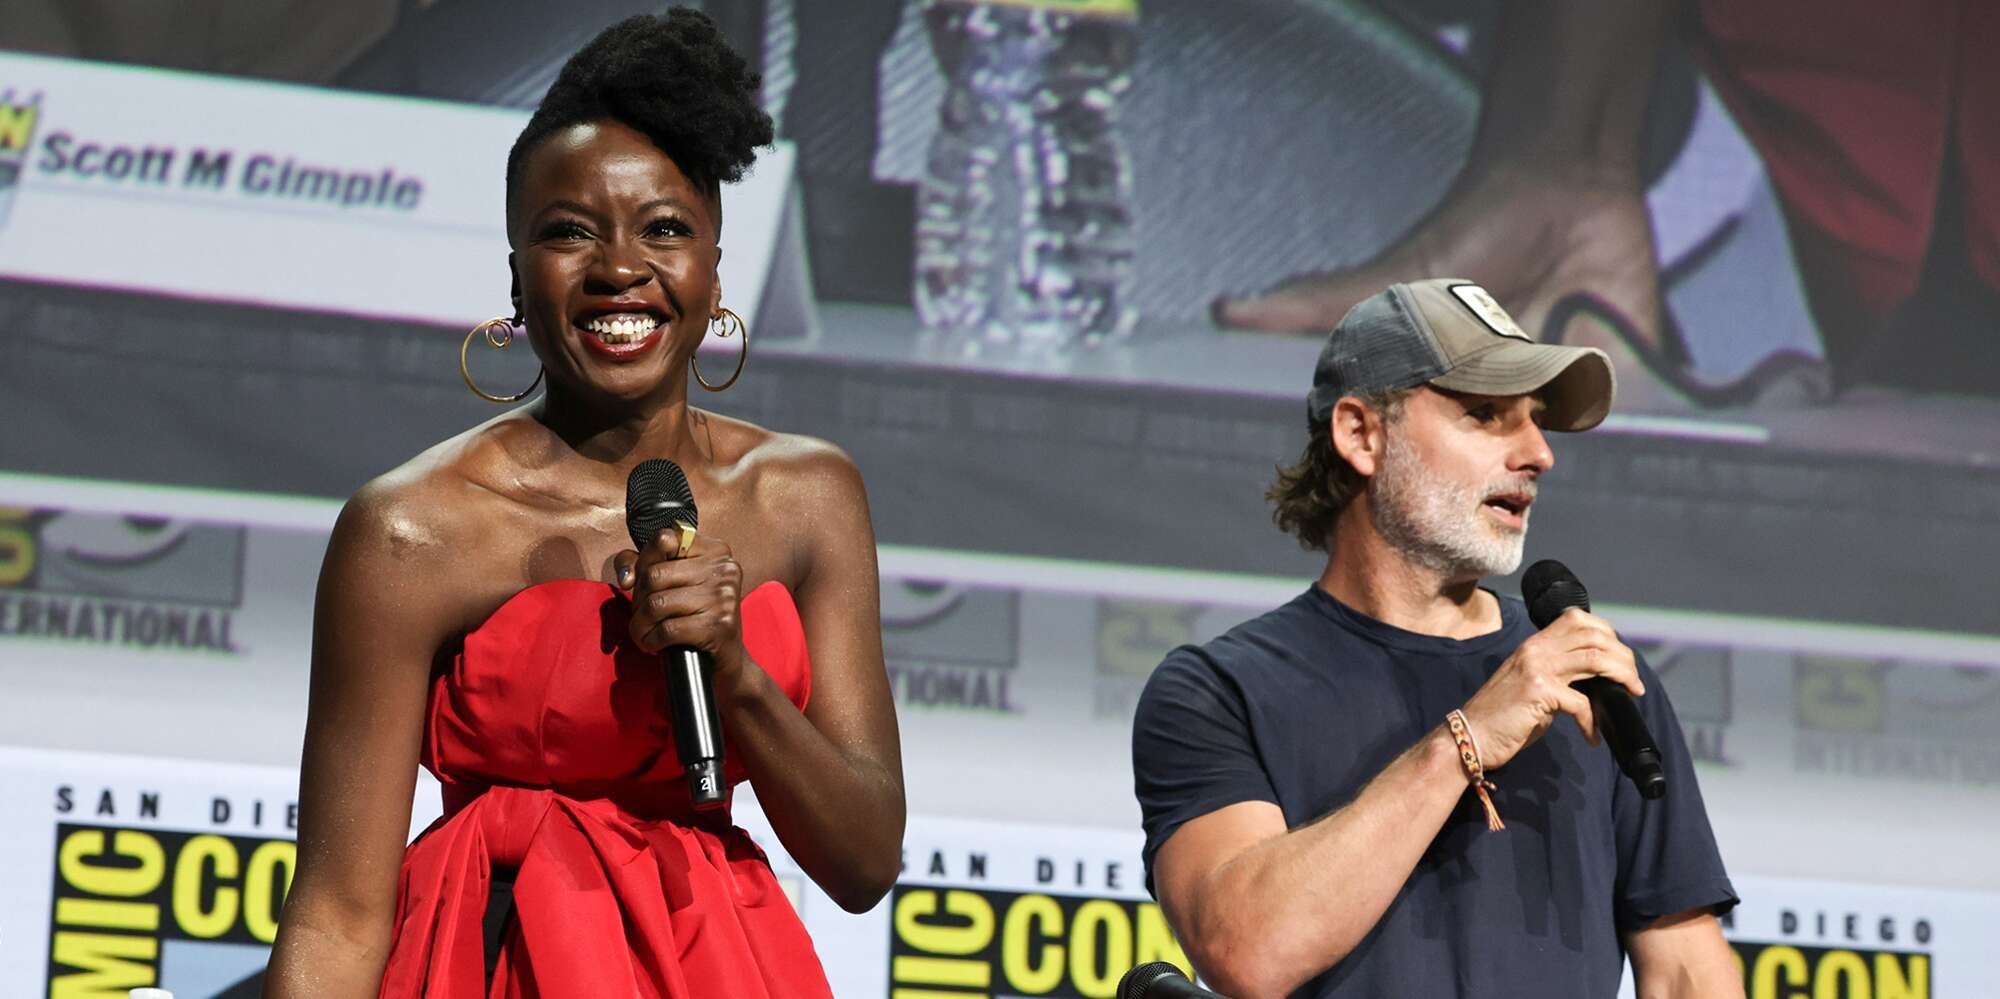 Andrew Lincoln and Danai Gurira crash The Walking Dead Comic-Con panel with Rick and Michonne news